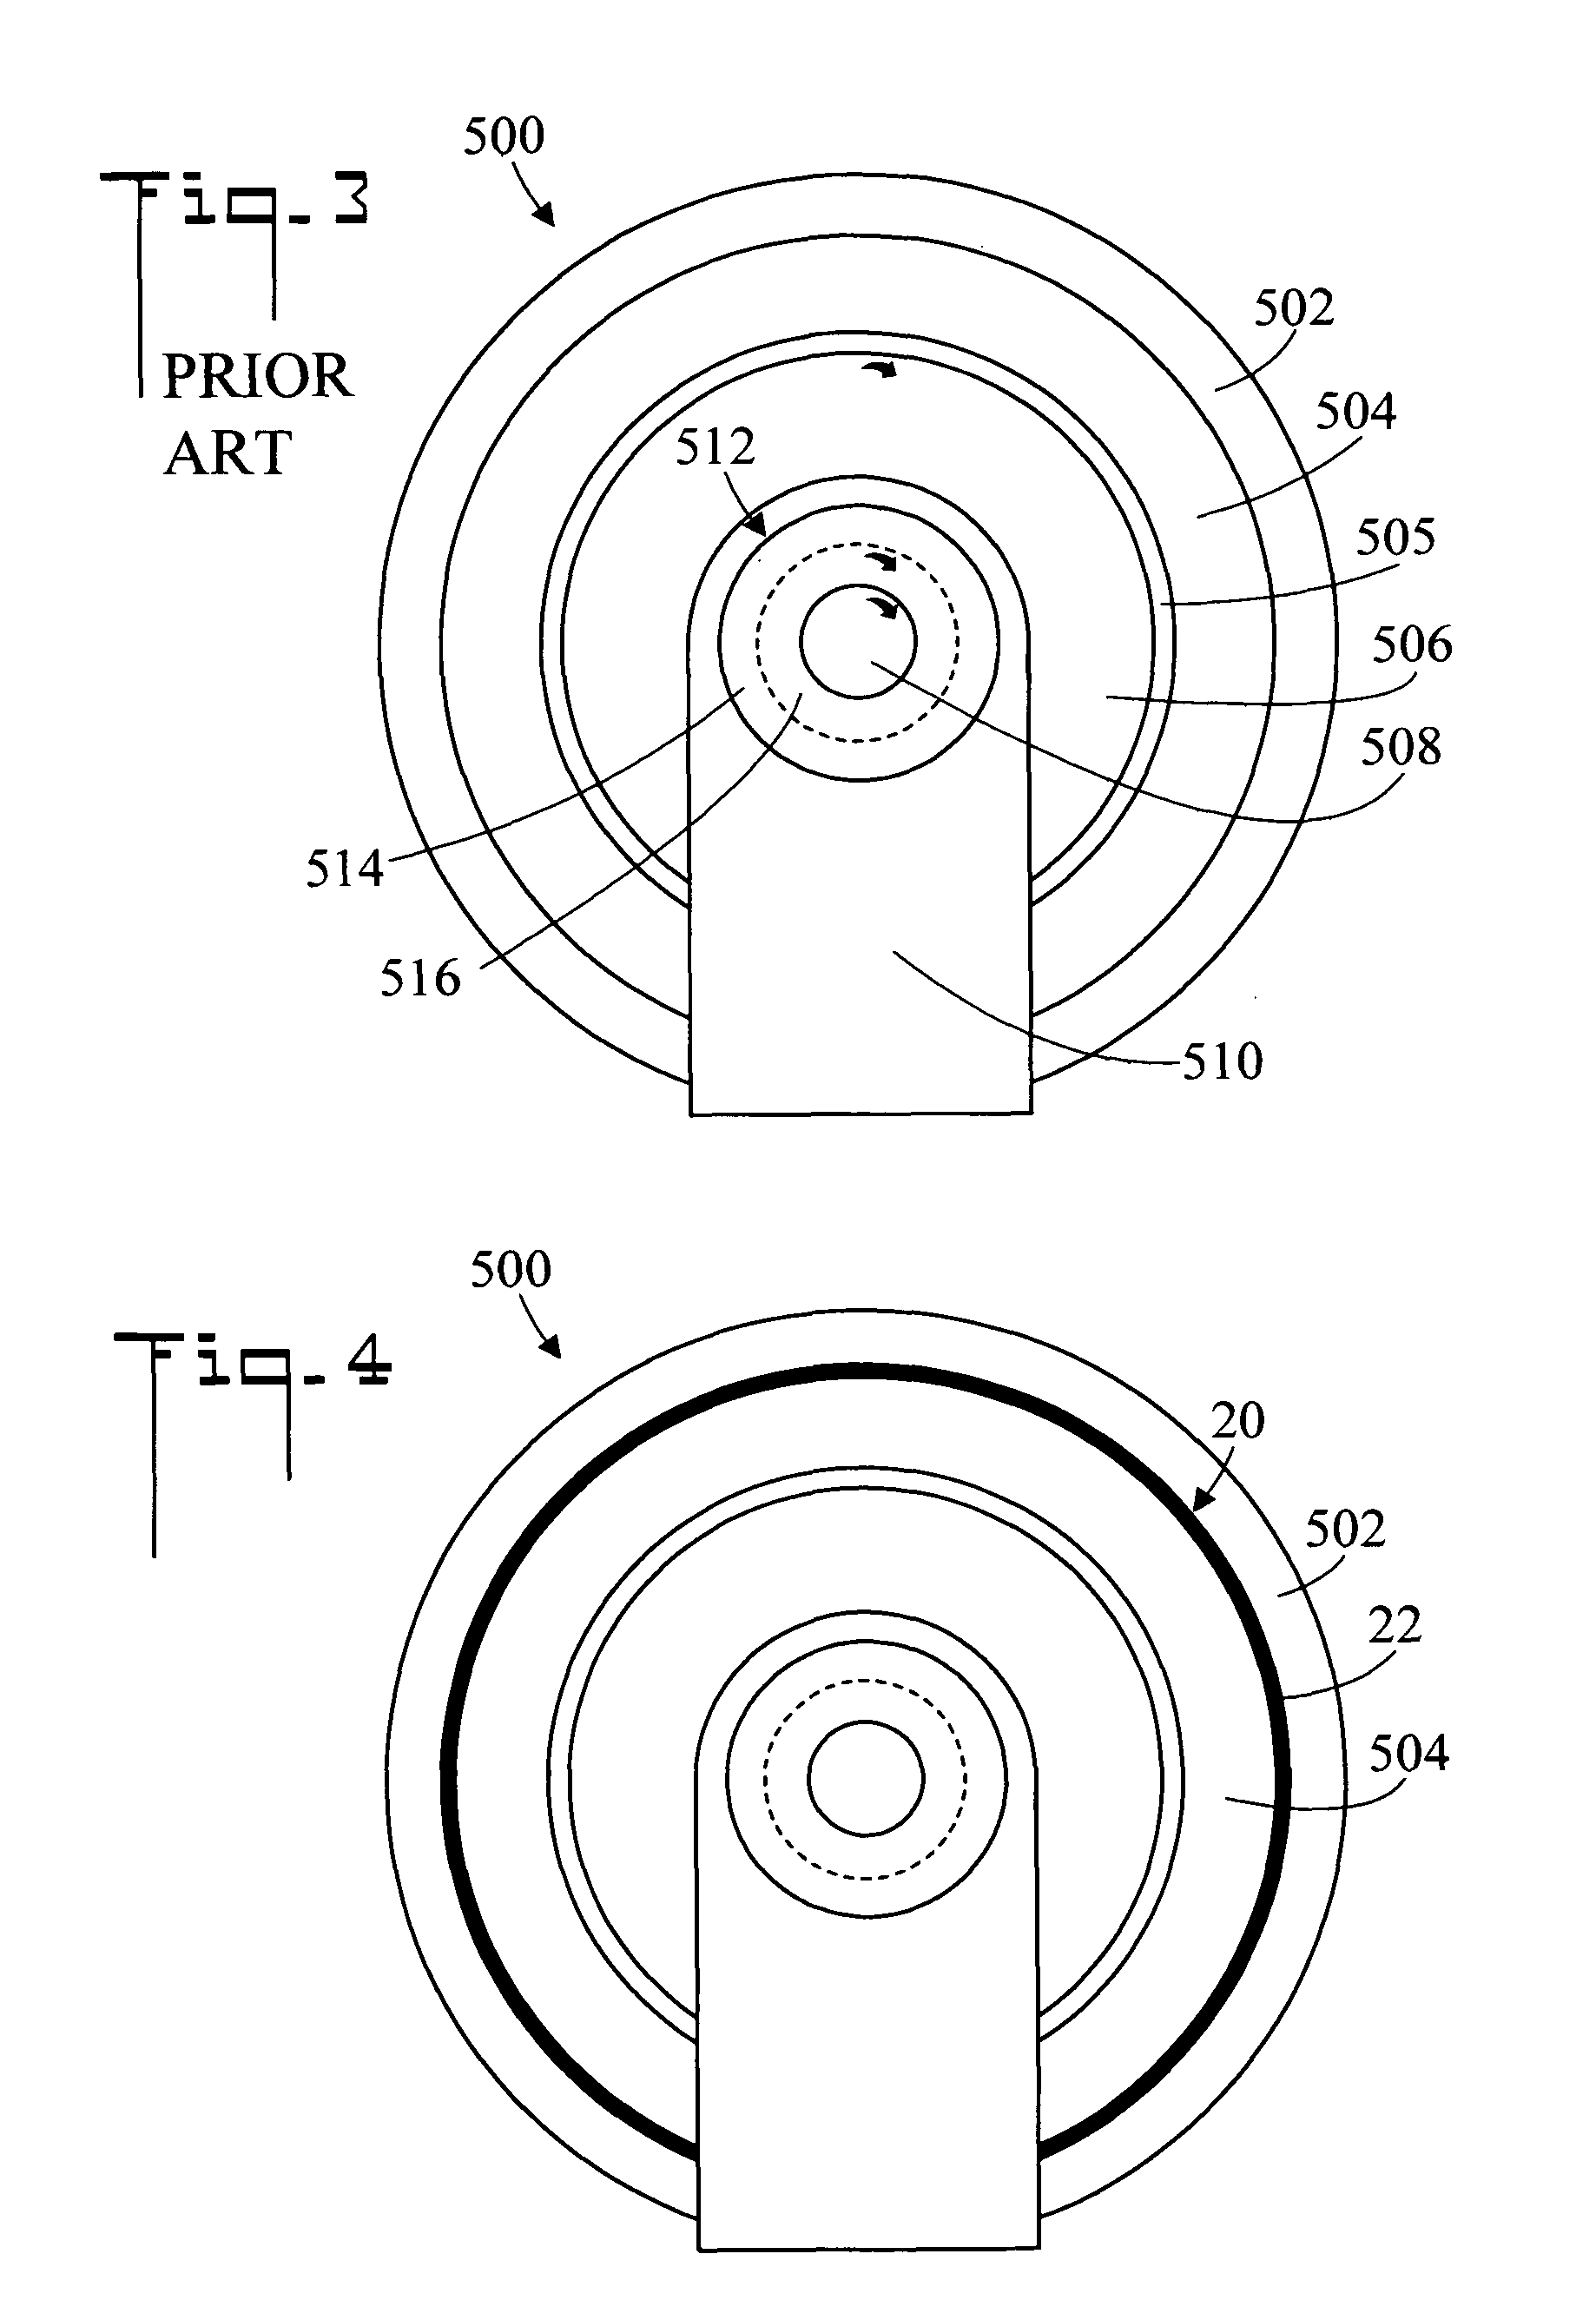 Method for mitigating bearing failue in an AC induction motor and apparatus therefor